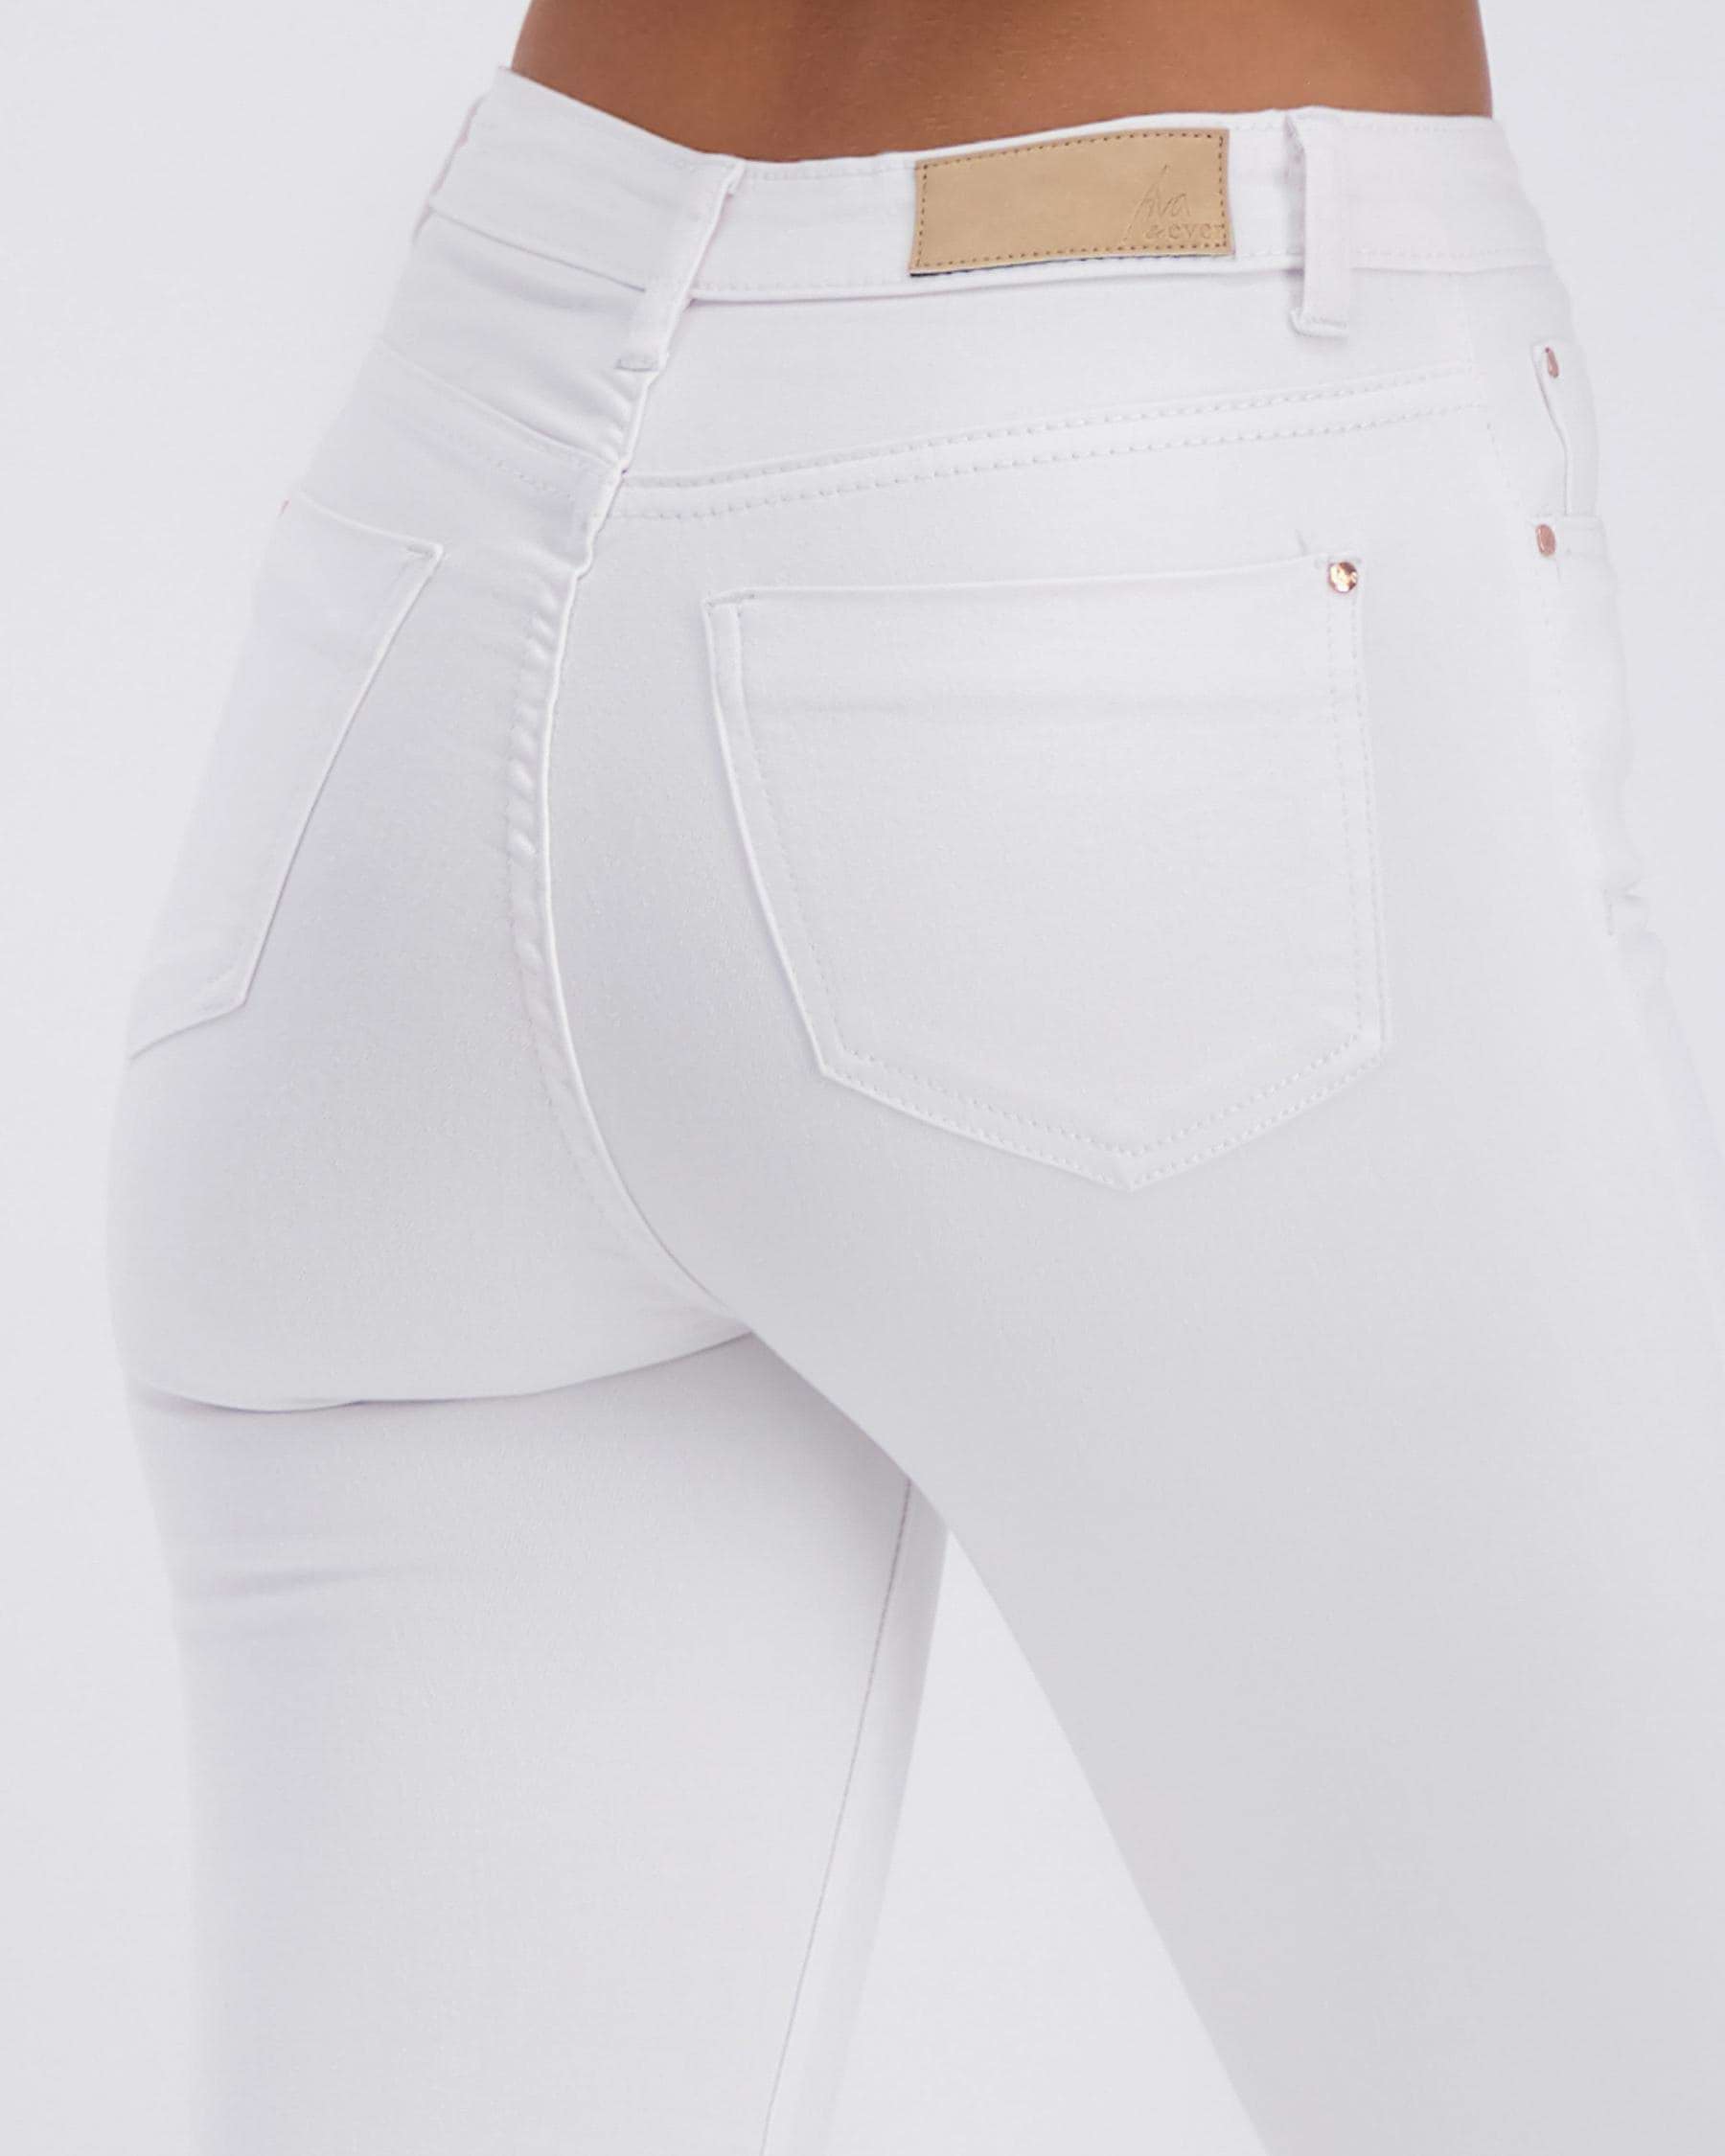 Shop Ava And Ever Chicago Jeans In White - Fast Shipping & Easy Returns ...